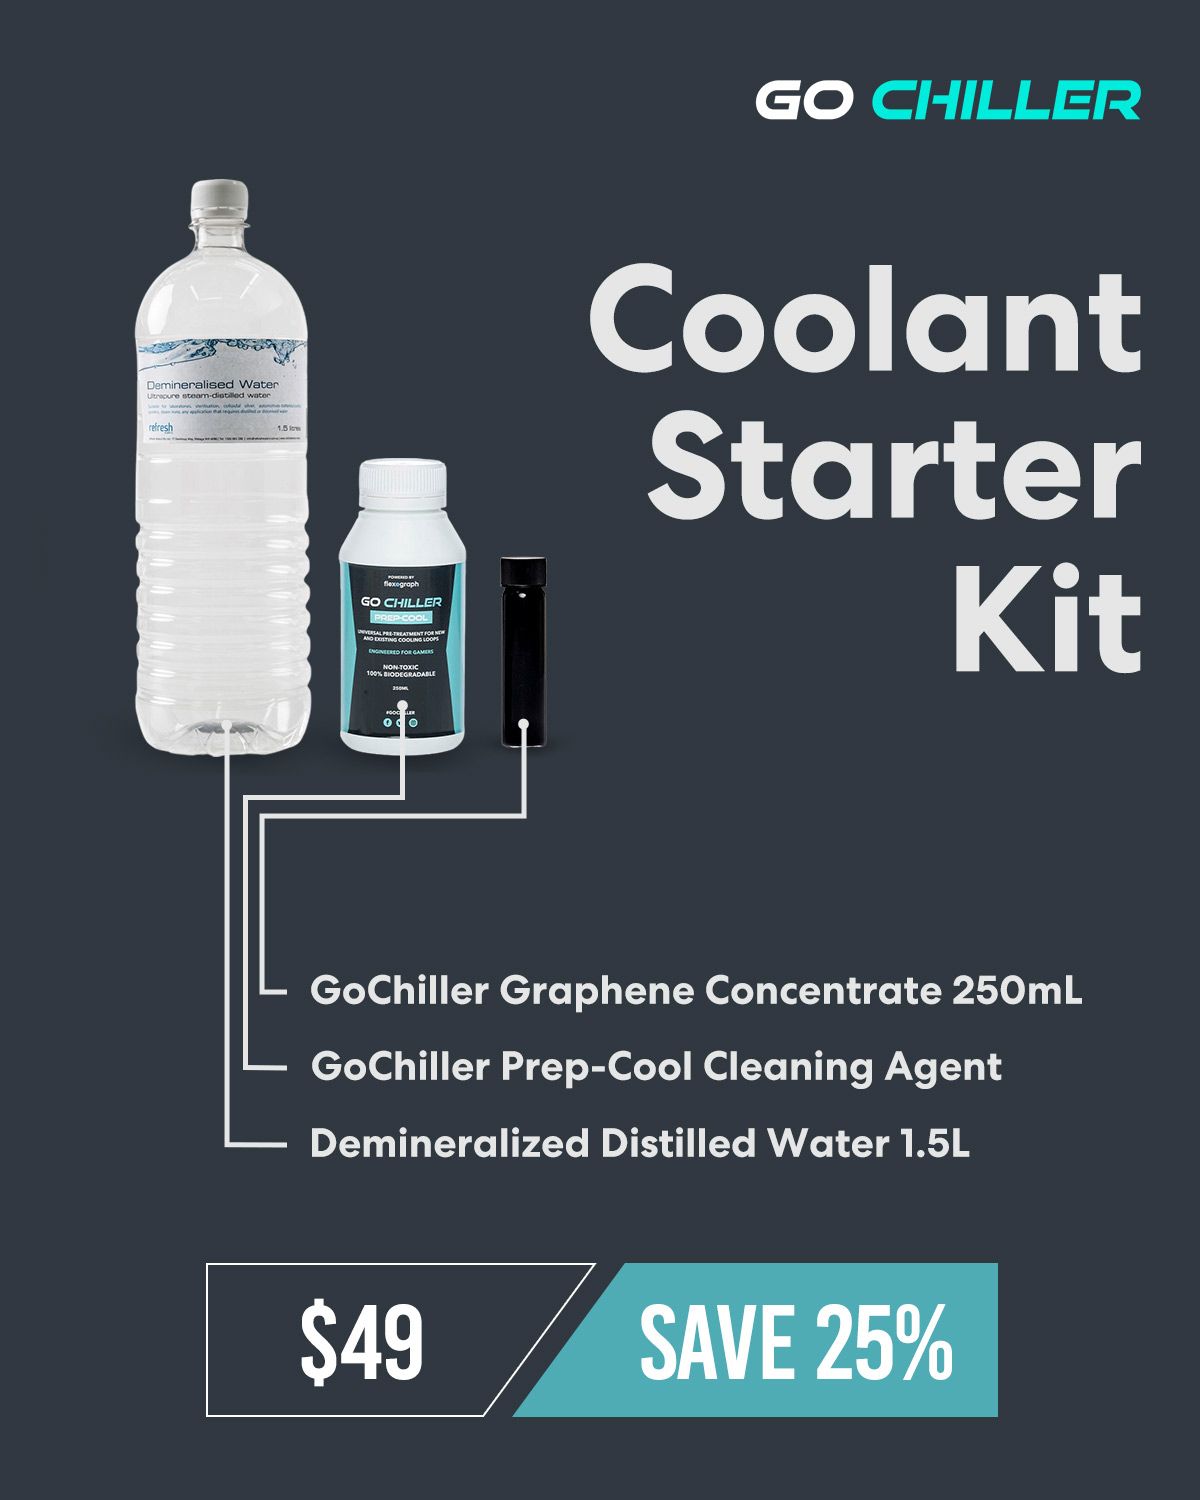 A large marketing image providing additional information about the product Go Chiller Coolant Starter Bundle - Additional alt info not provided